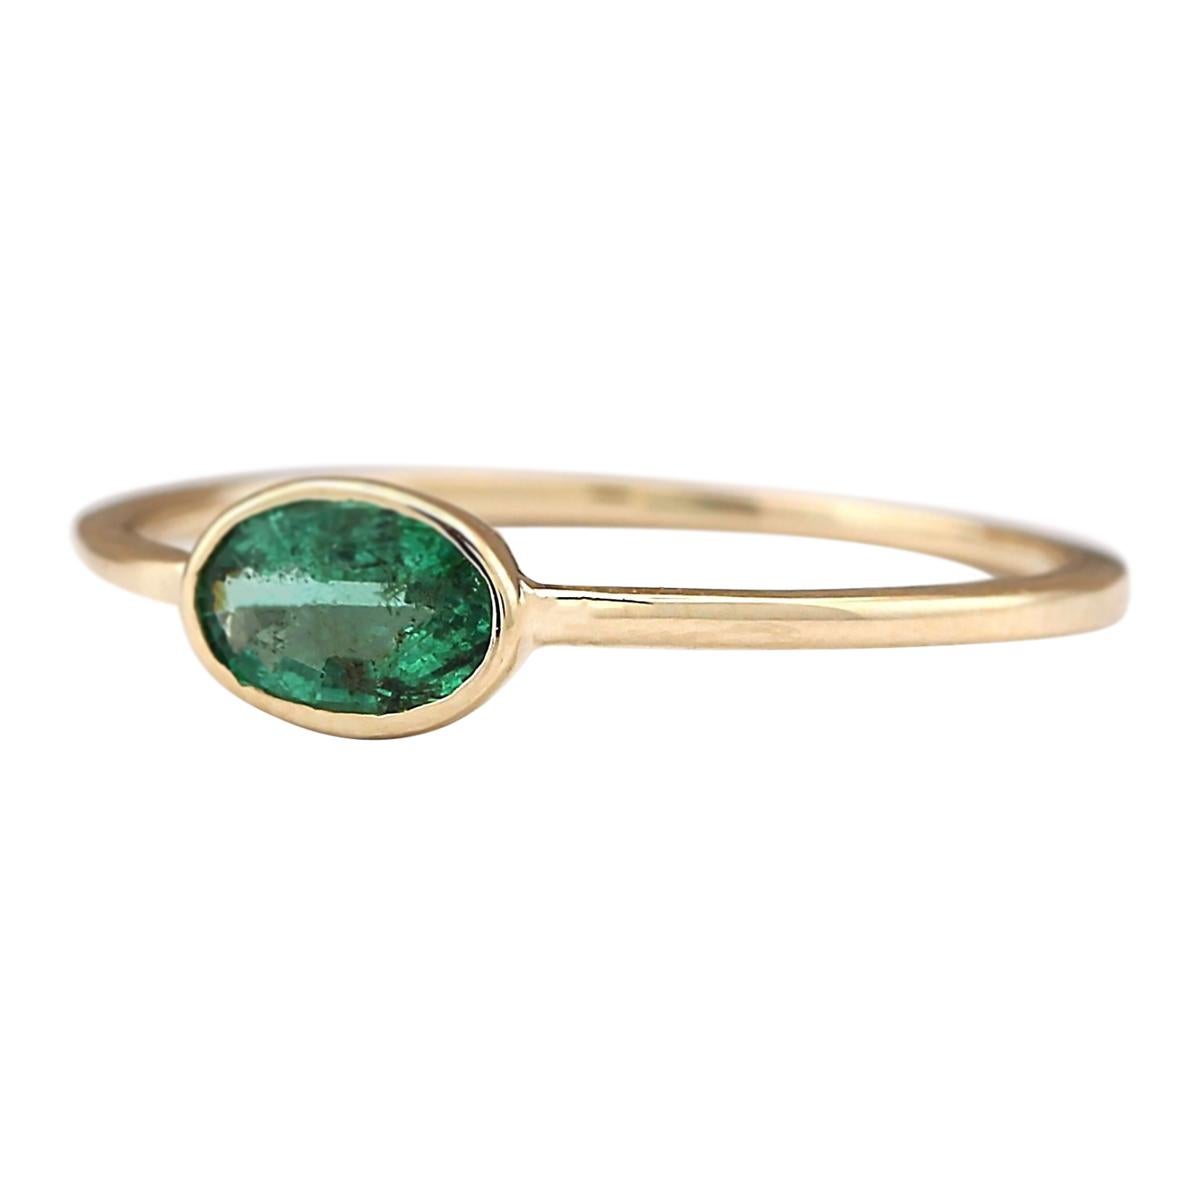 Introducing our exquisite 18 Karat Yellow Gold Ring featuring a captivating 0.50 Carat Natural Emerald gemstone. Stamped for authenticity, this ring weighs a mere 1.0 gram, ensuring both elegance and comfort. The Emerald gemstone, with its vibrant